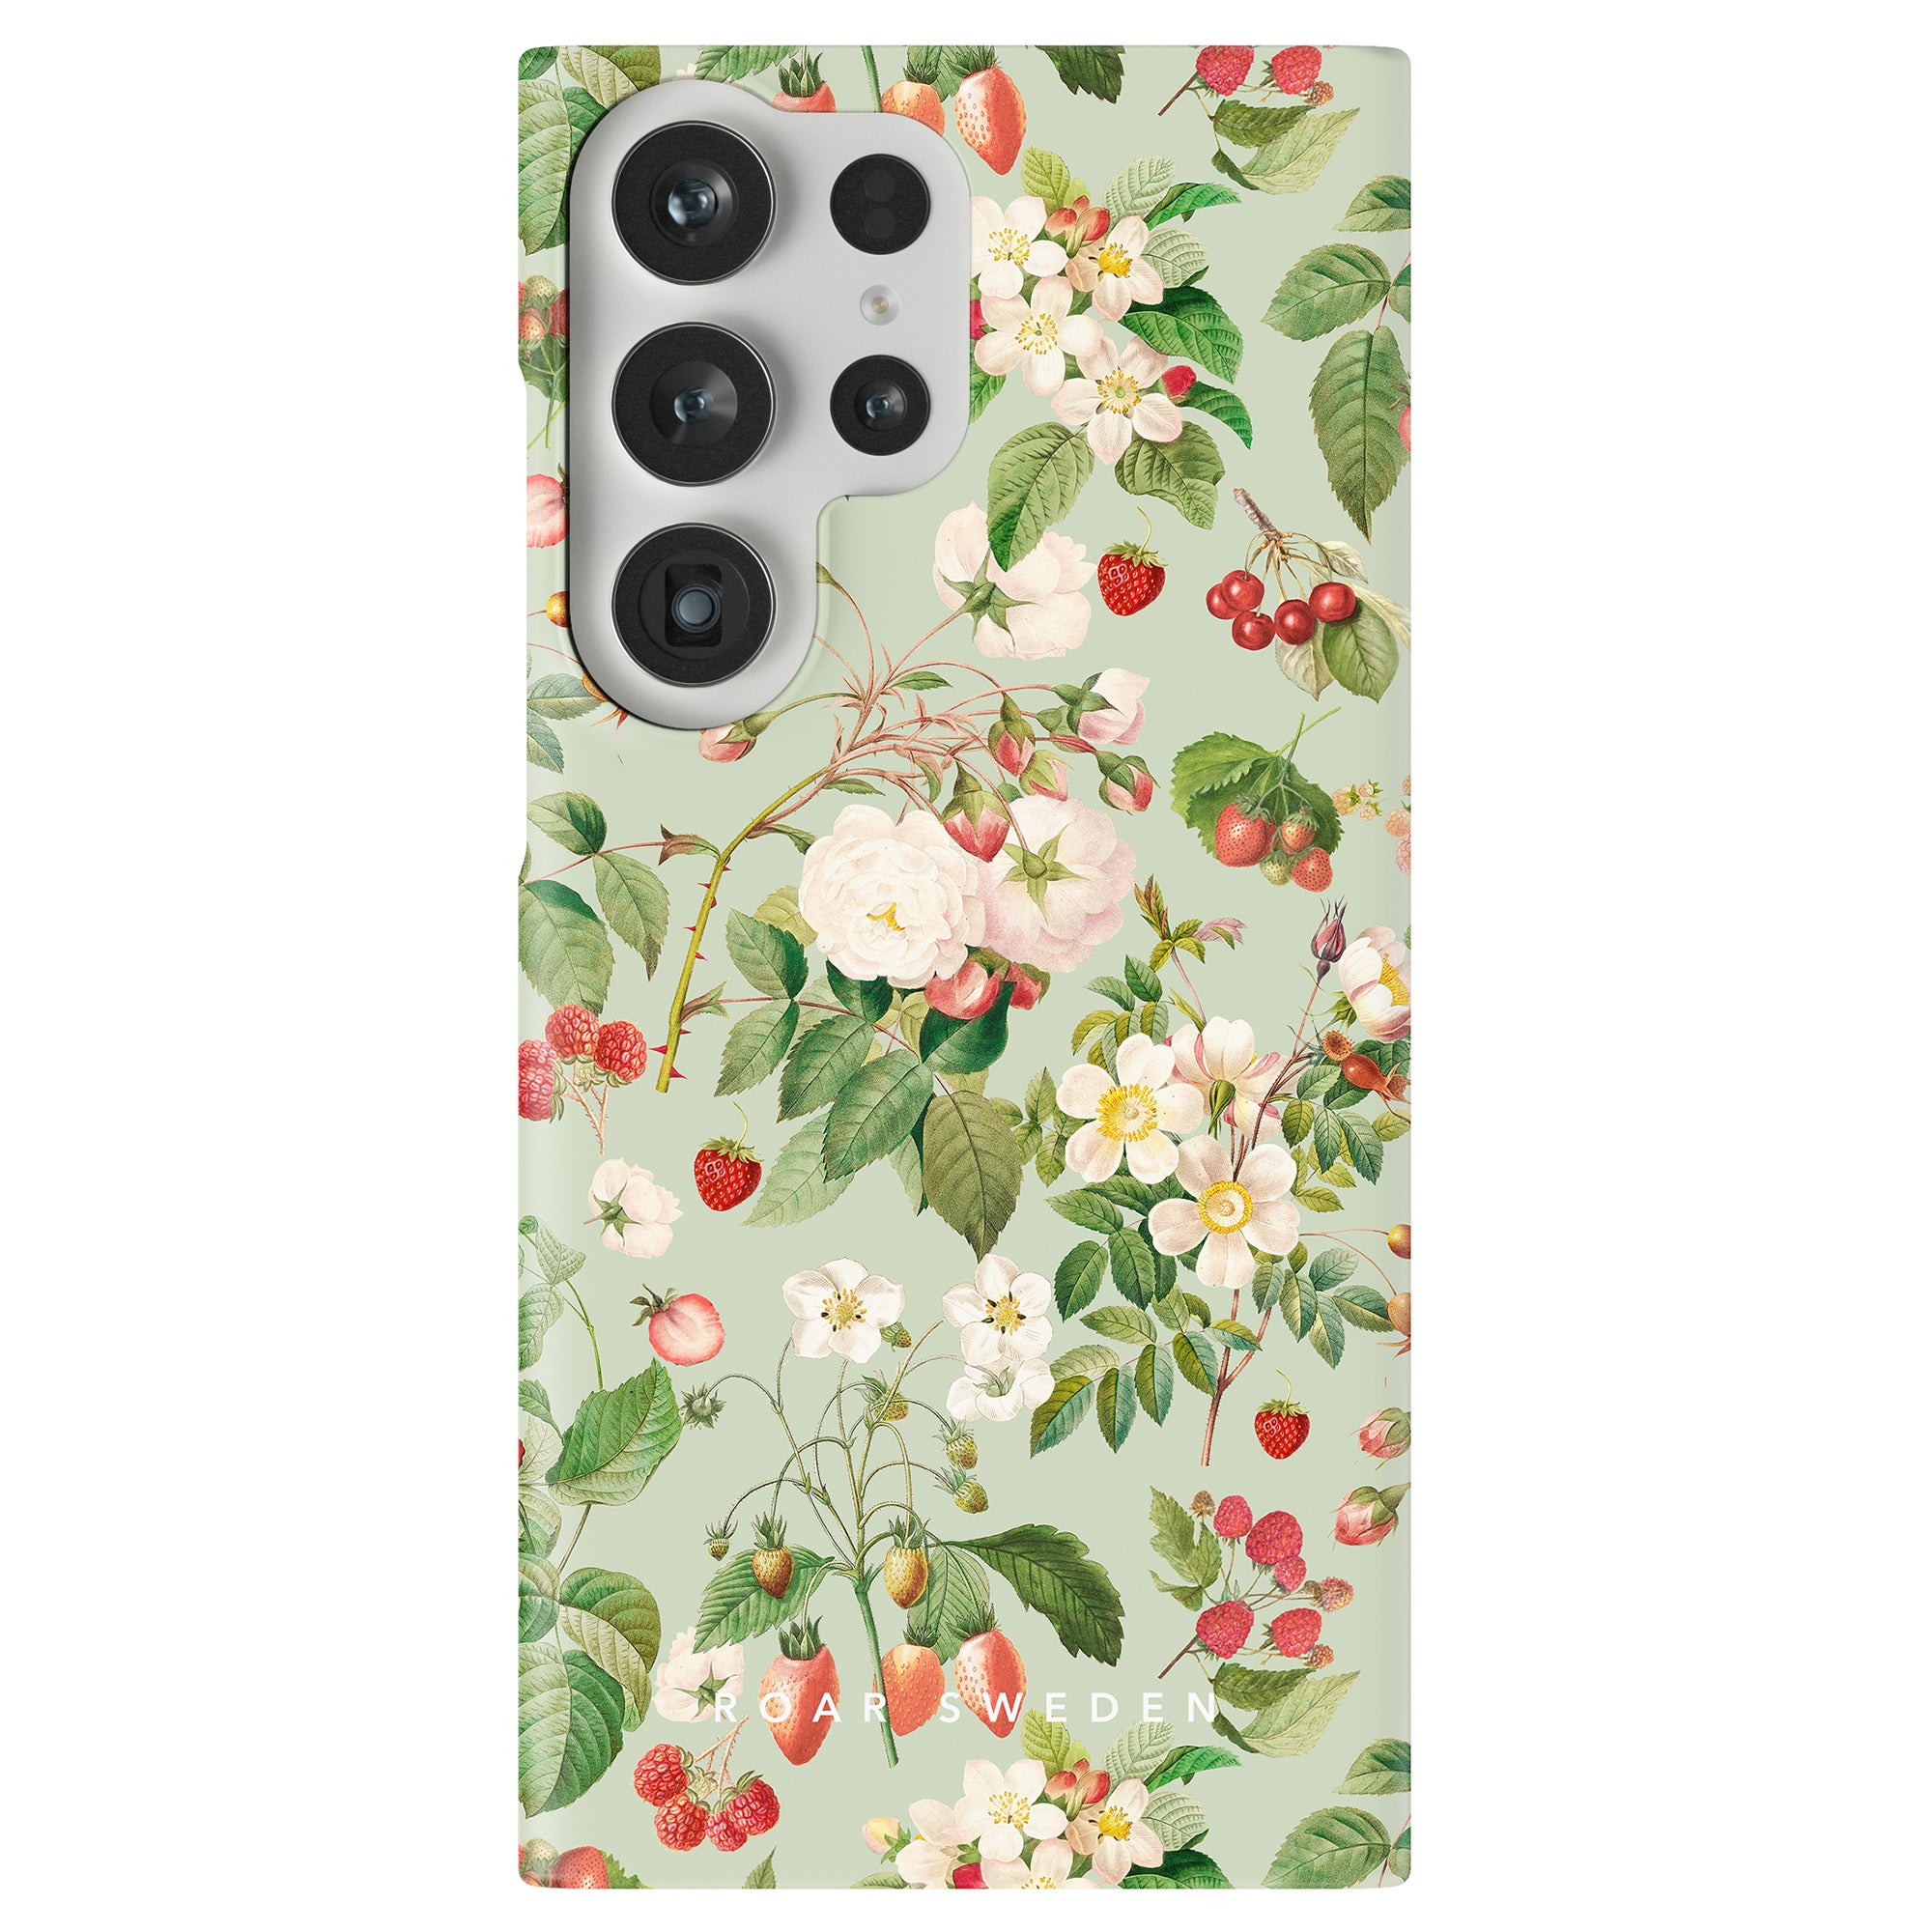 Tasty Garden - Slim case design featuring integrated camera cutouts for seamless use.